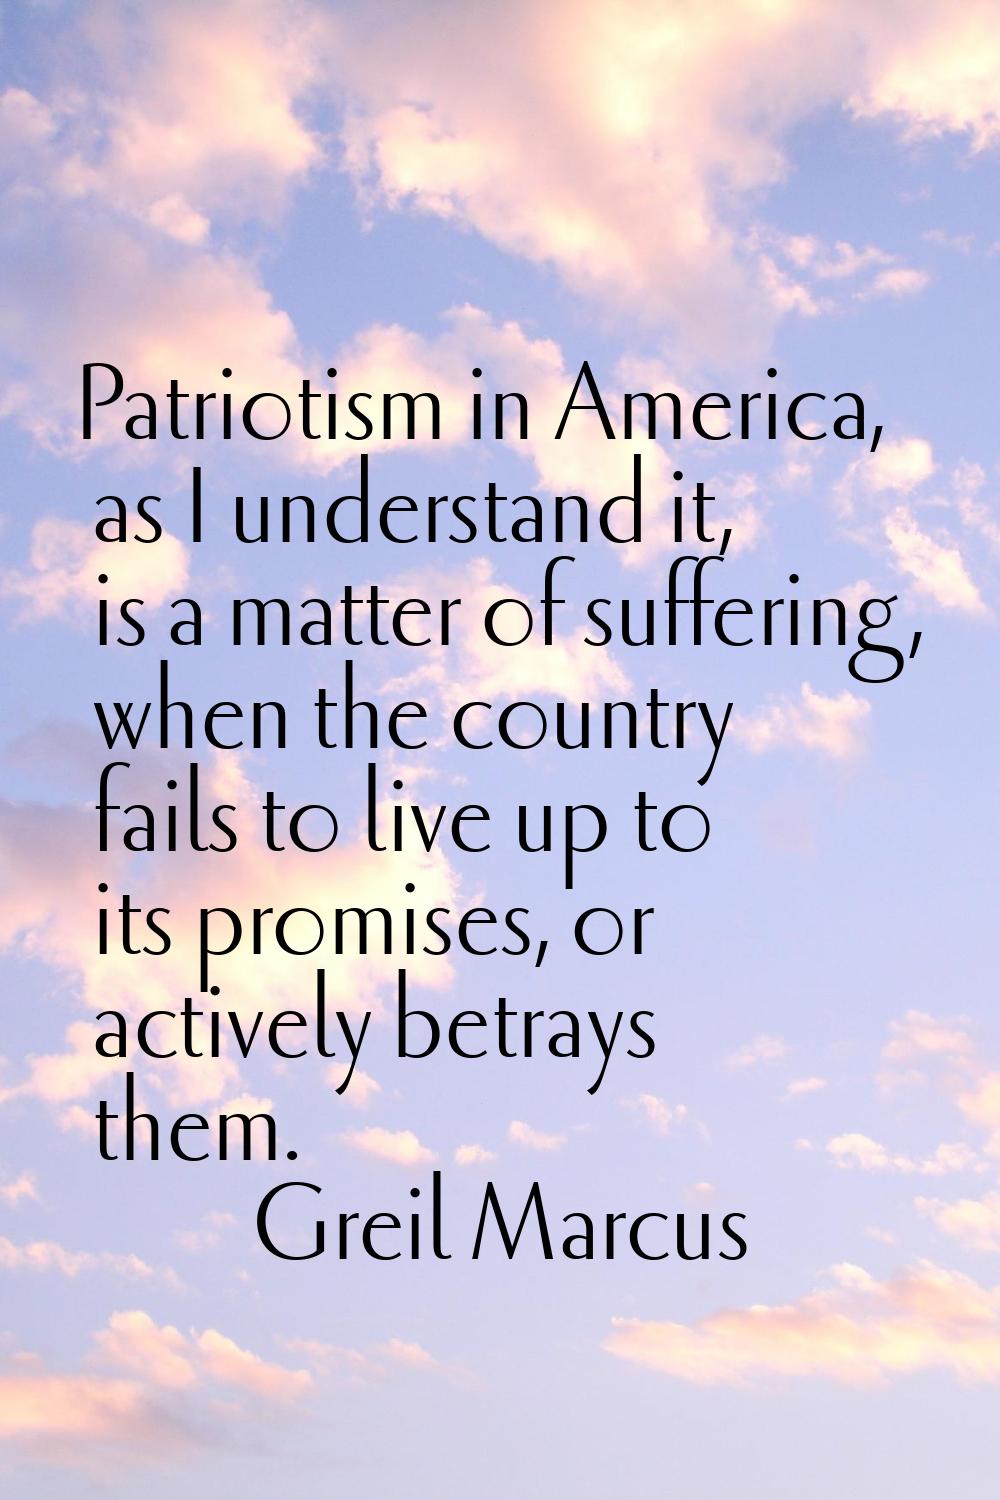 Patriotism in America, as I understand it, is a matter of suffering, when the country fails to live